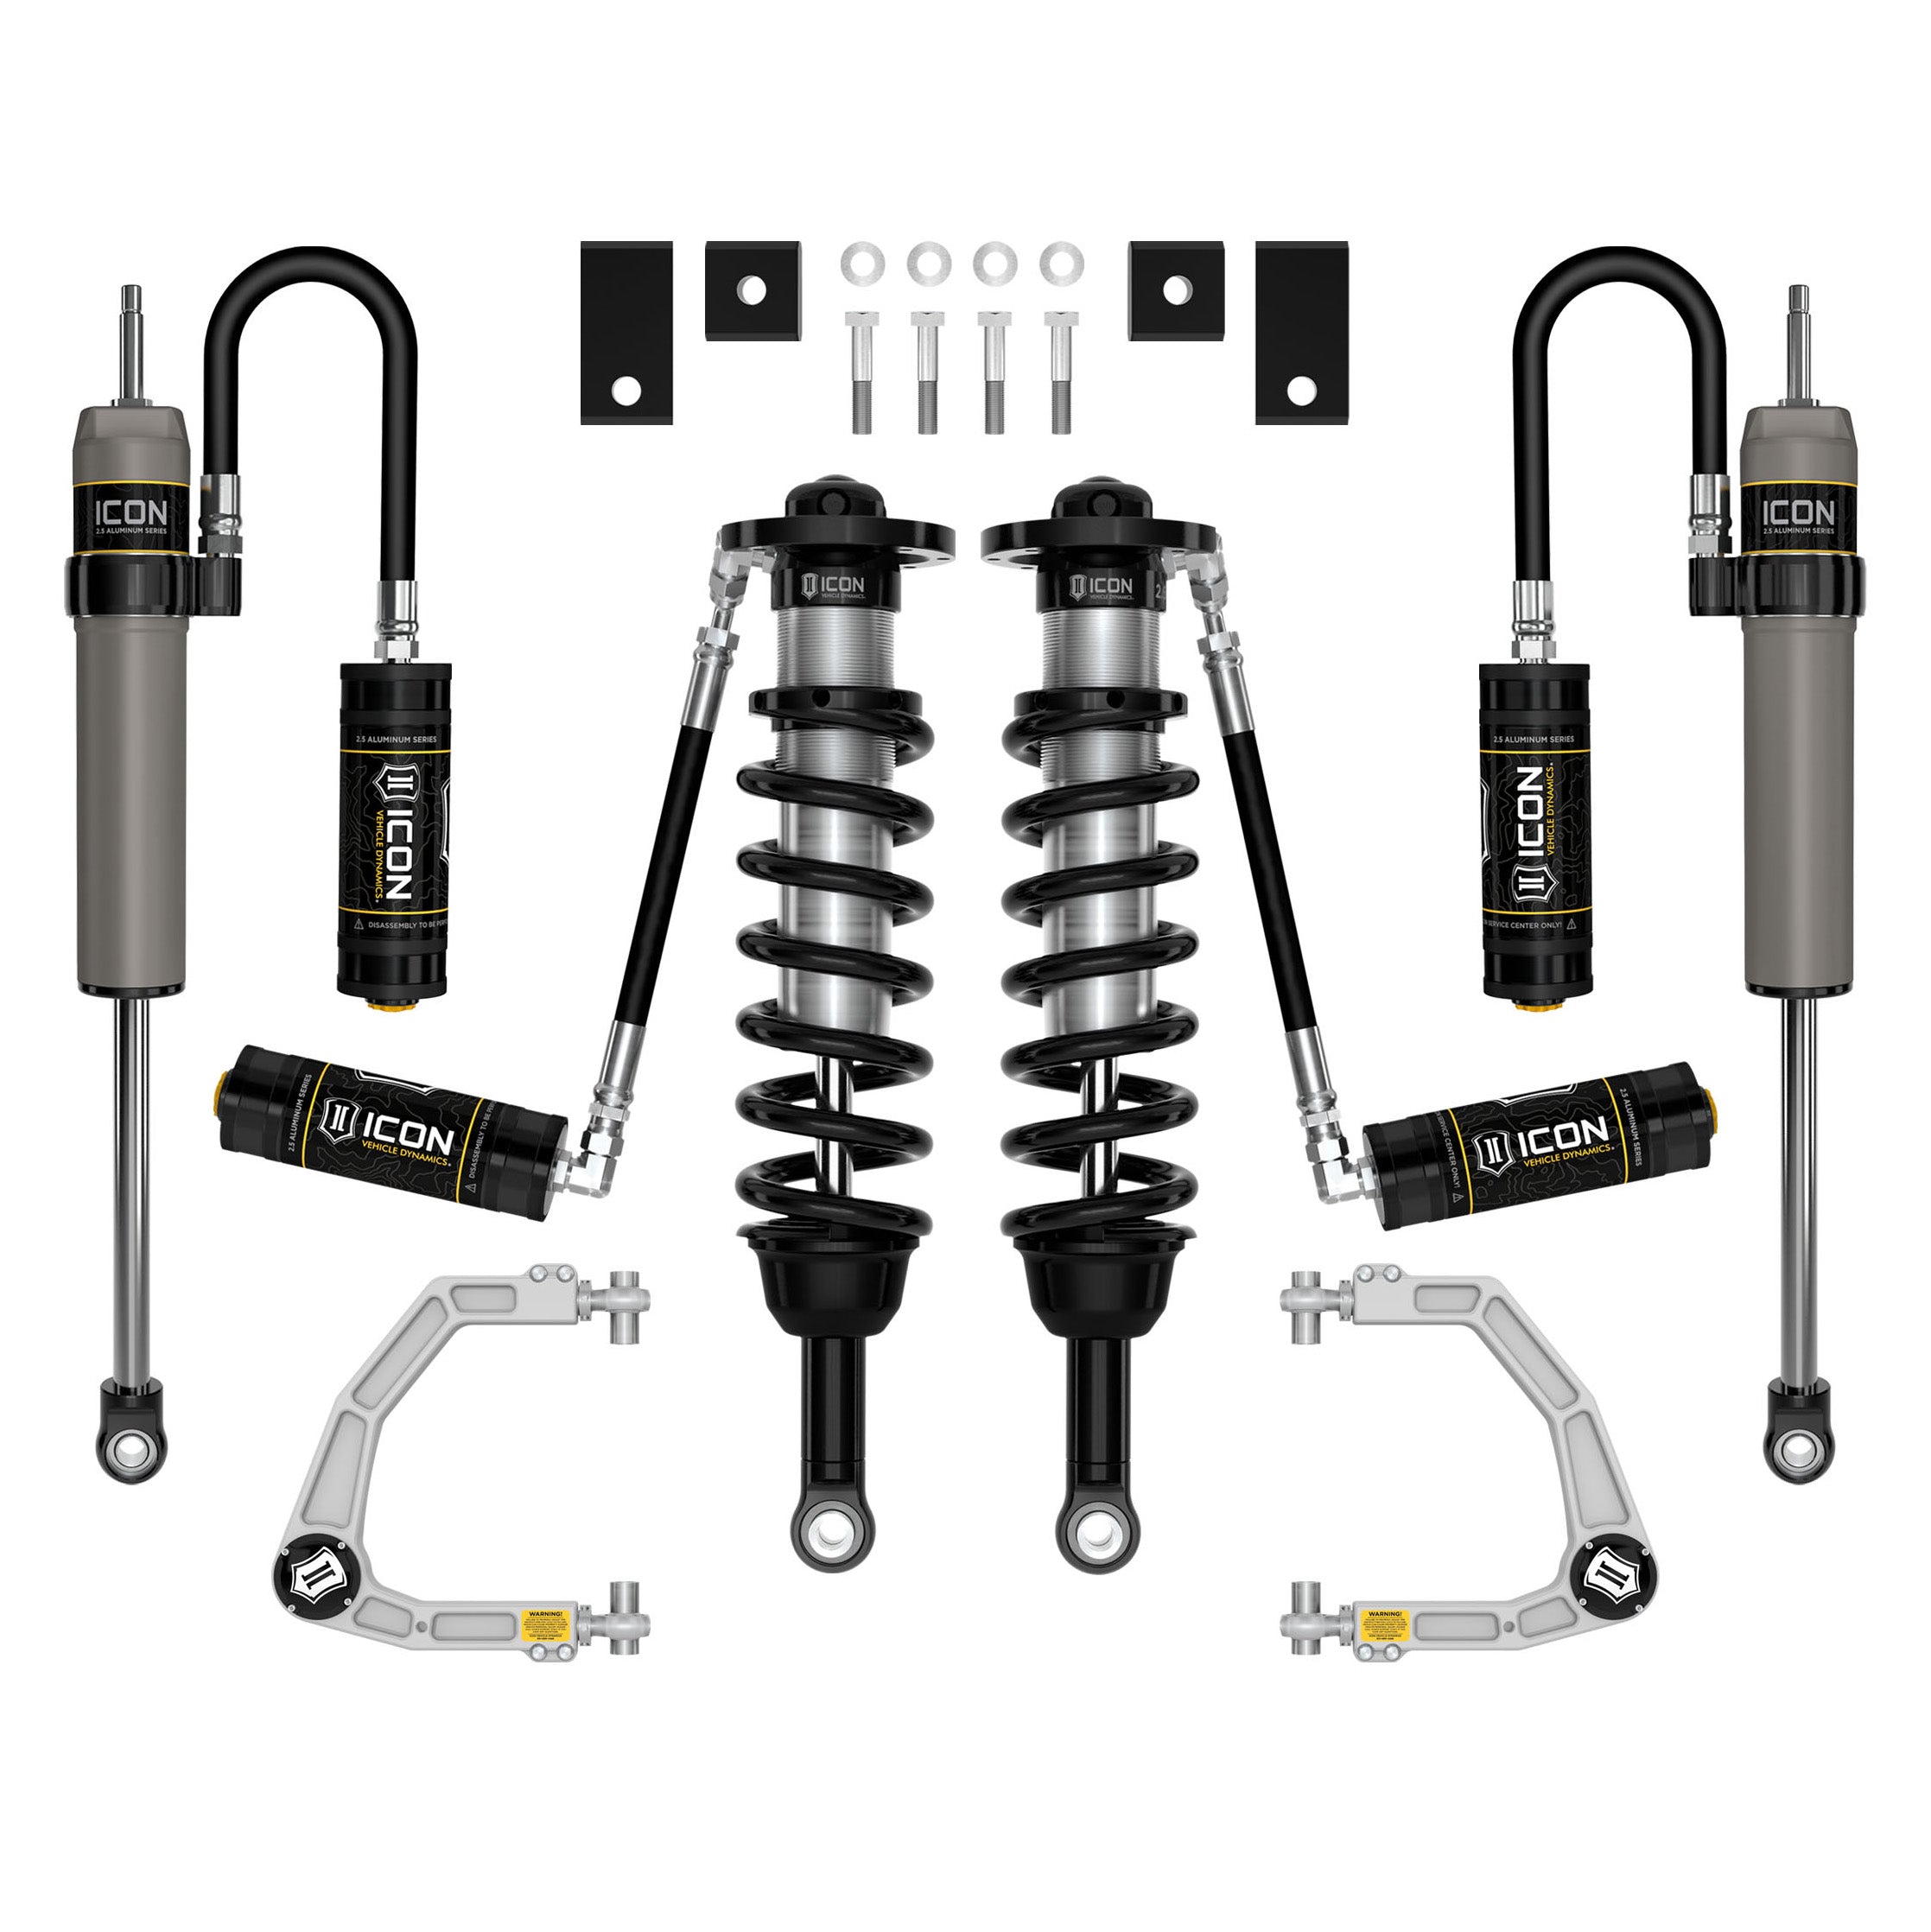 22-23 Toyota Tundra Icon Stage 7 Billet Suspension System parts